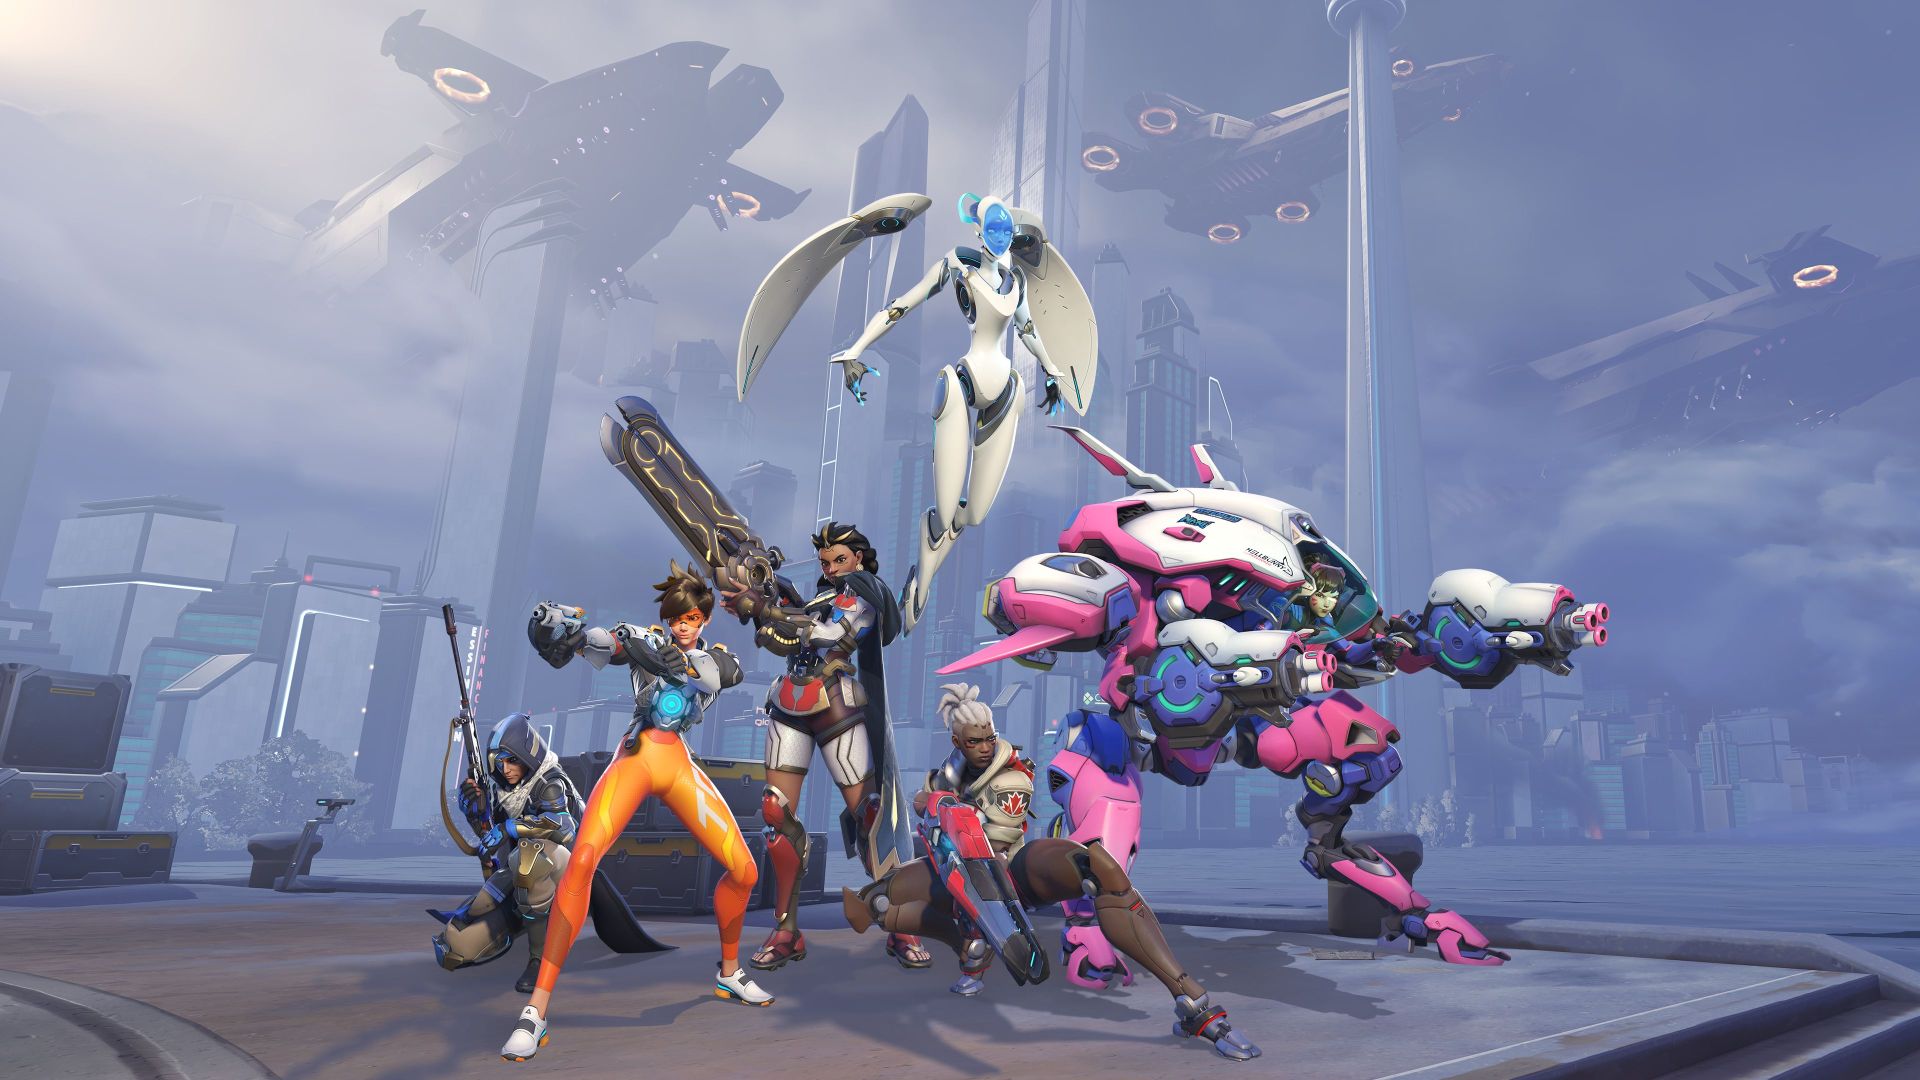 Overwatch 2 is developed by Blizzard Entertainment.